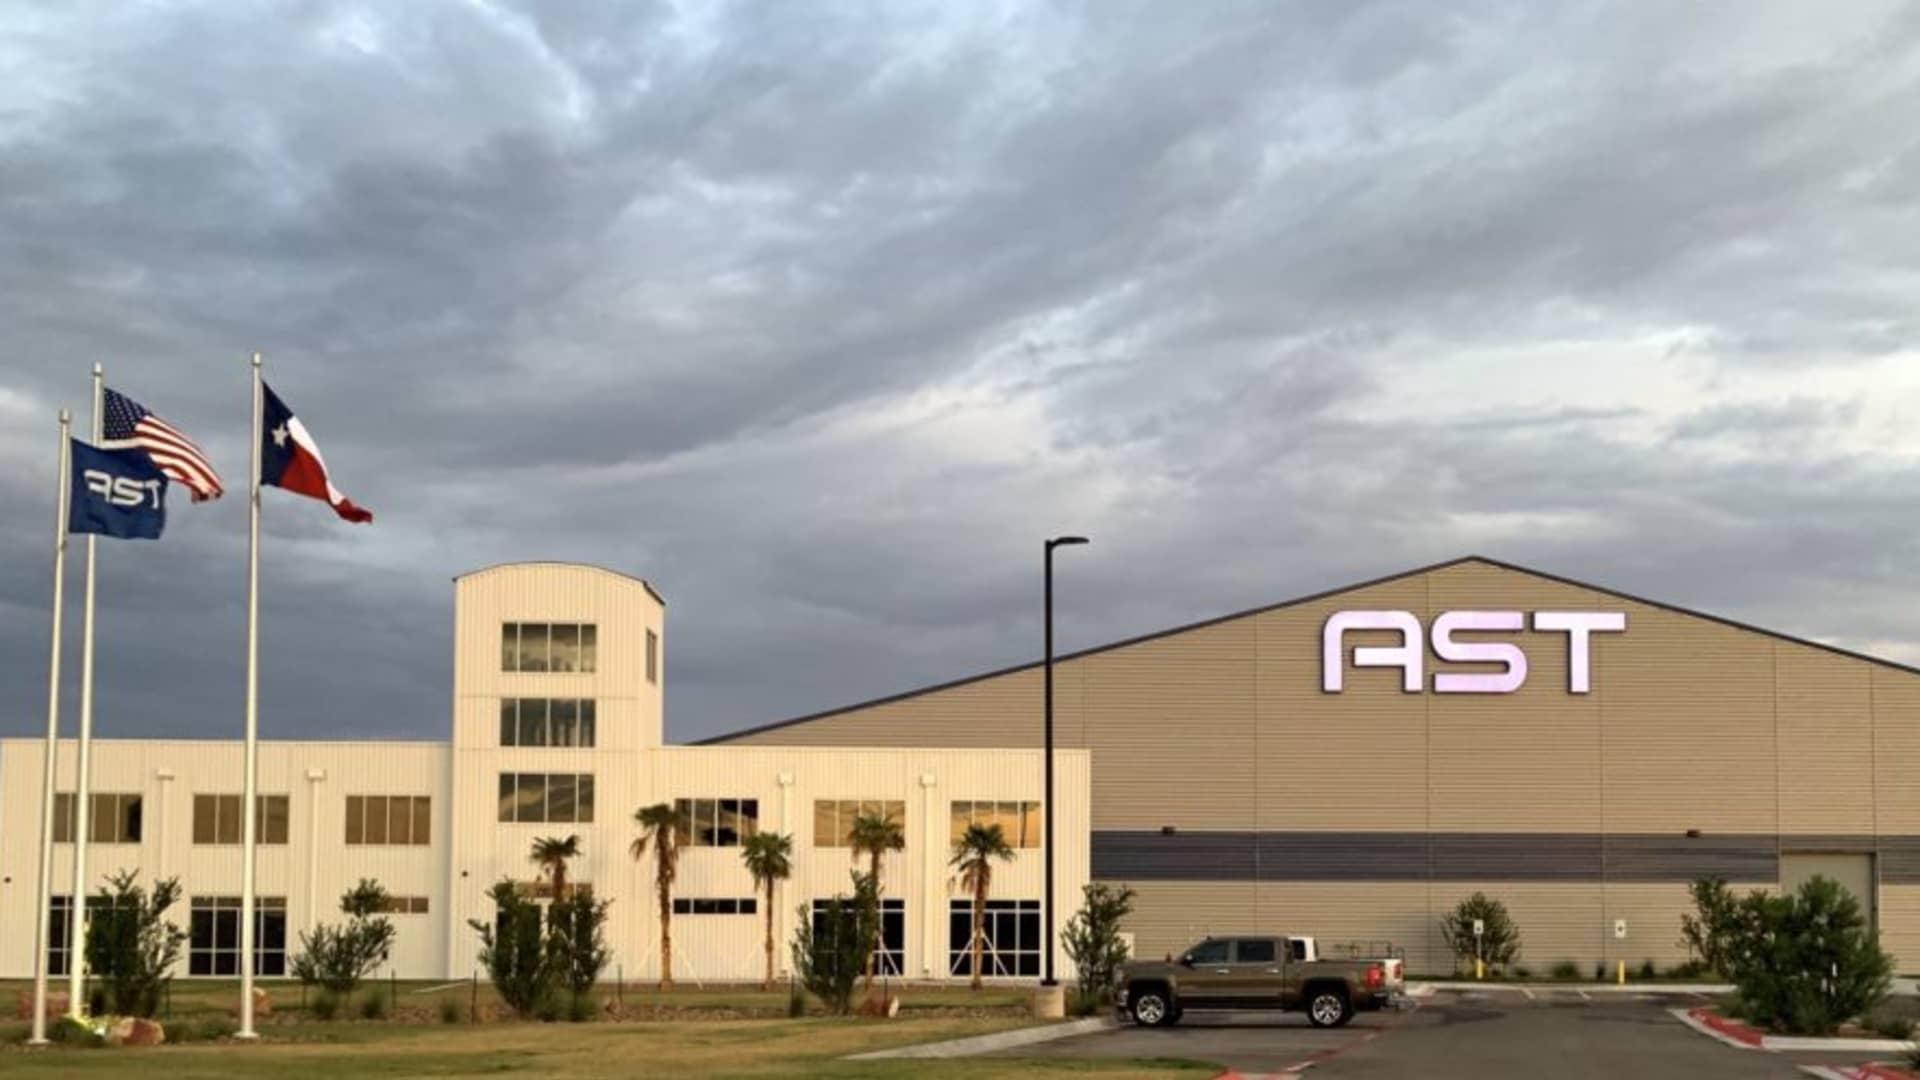 AST's corporate headquarters and high-volume manufacturing facility in Midland, Texas